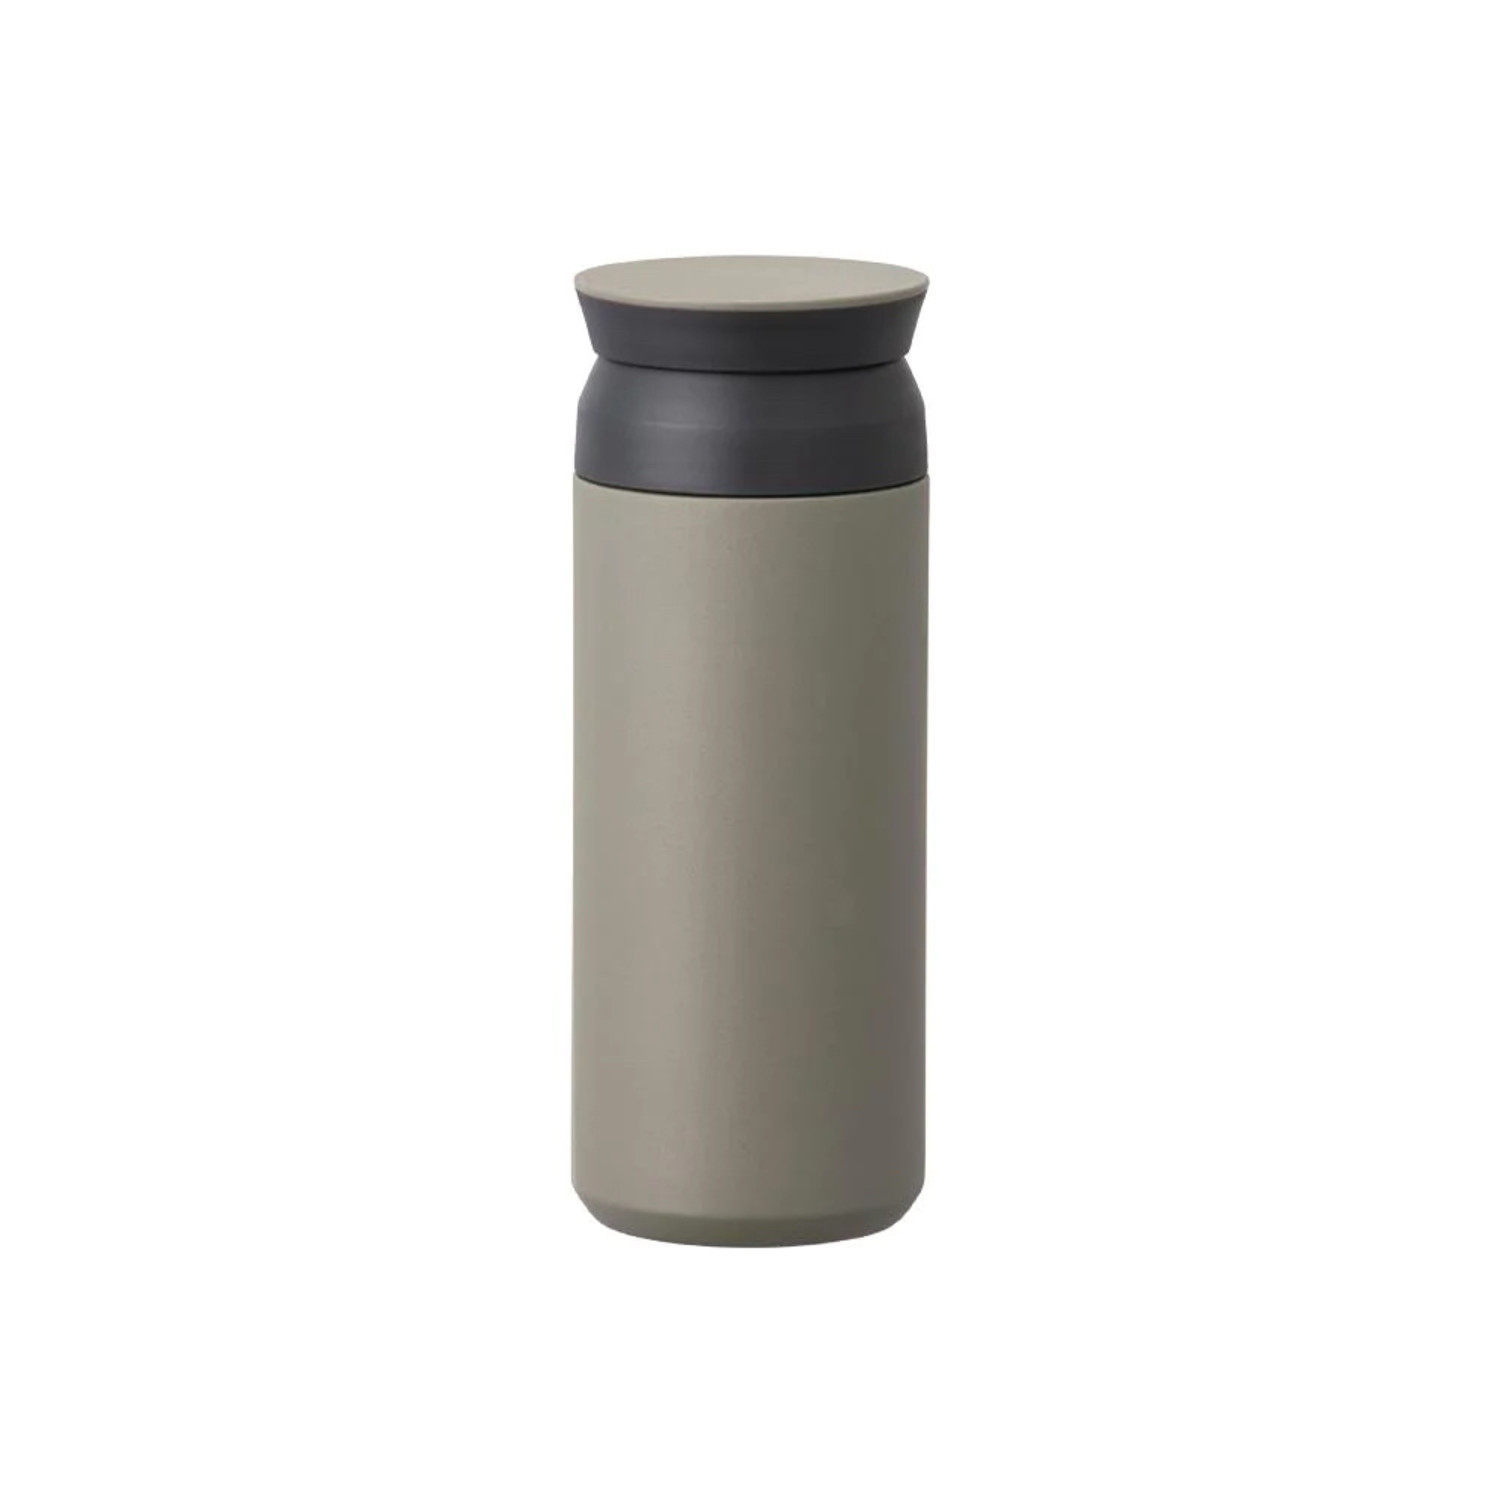 Kinto Vacuum Insulated Travel Tumbler with Screw Top Lid, 5 Colors